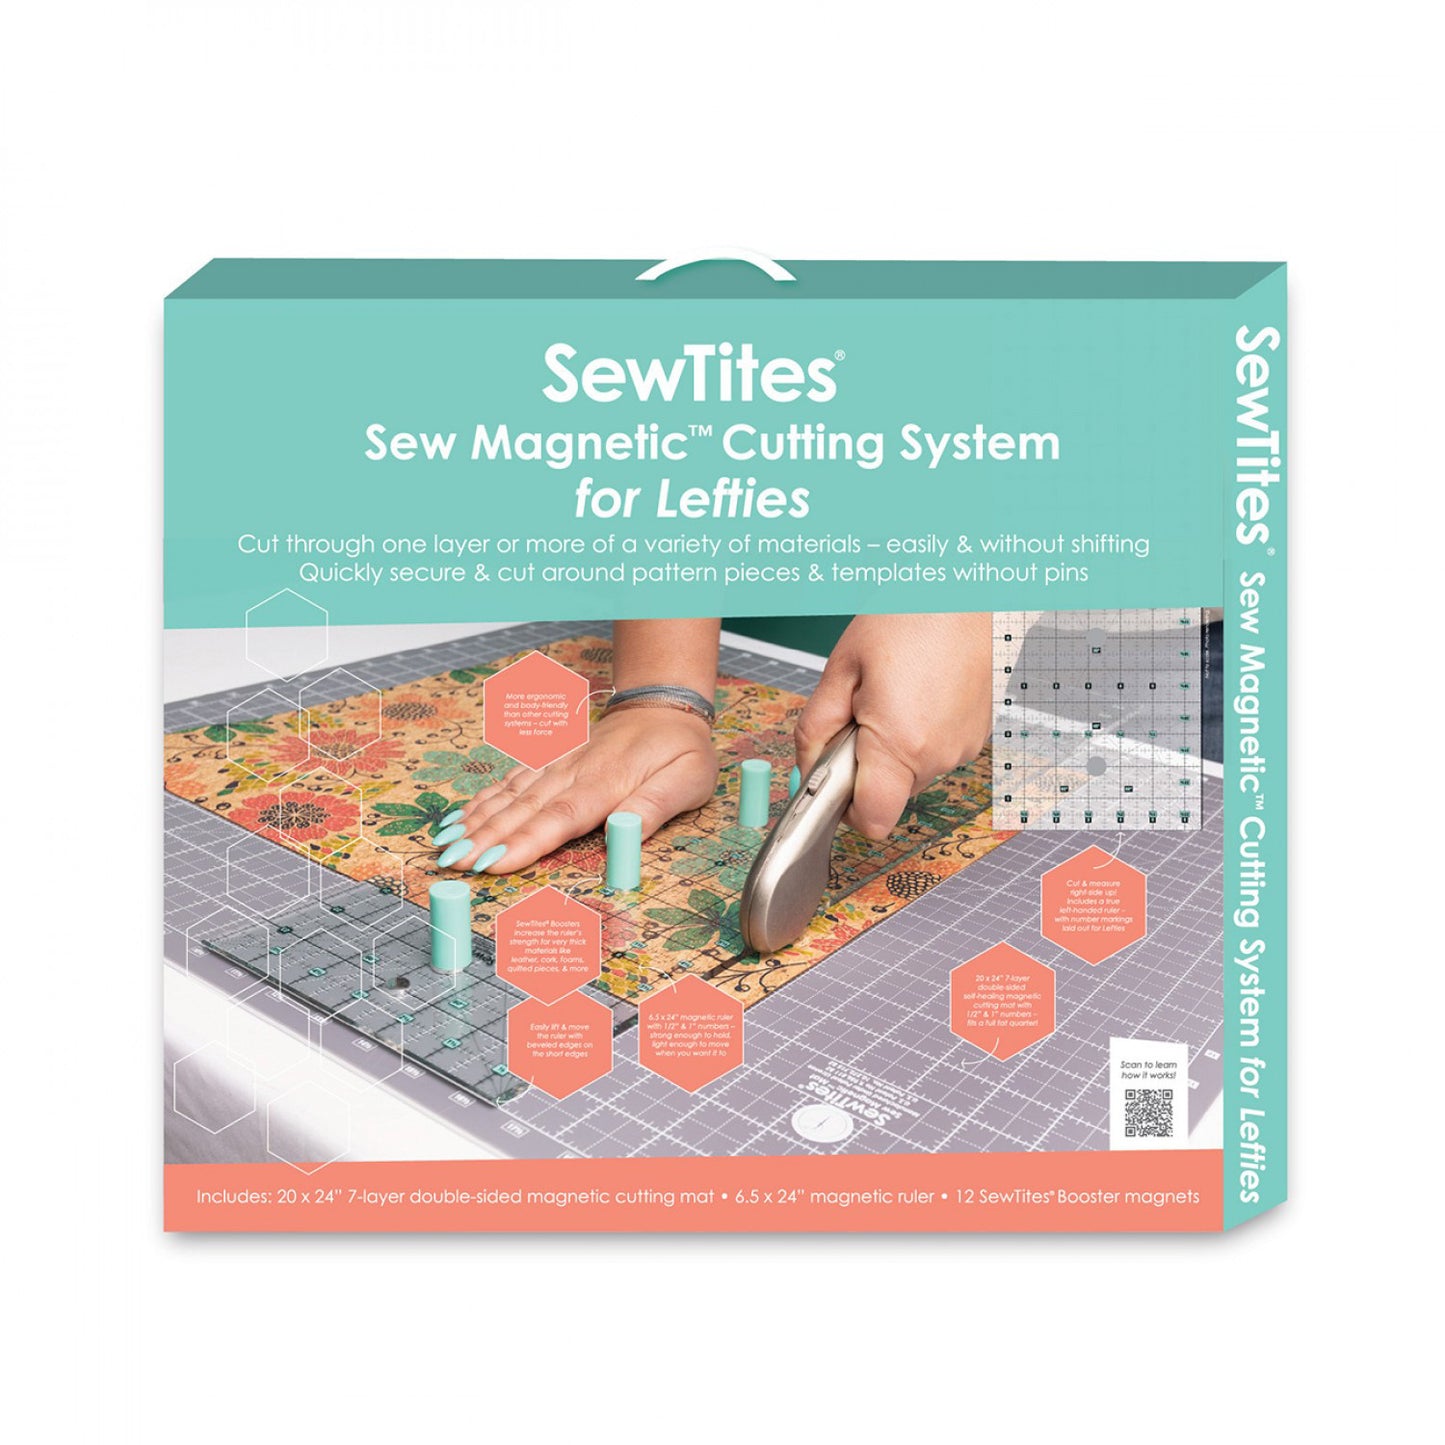 SewTites Sew Magnetic Cutting System For Lefties Primary Image